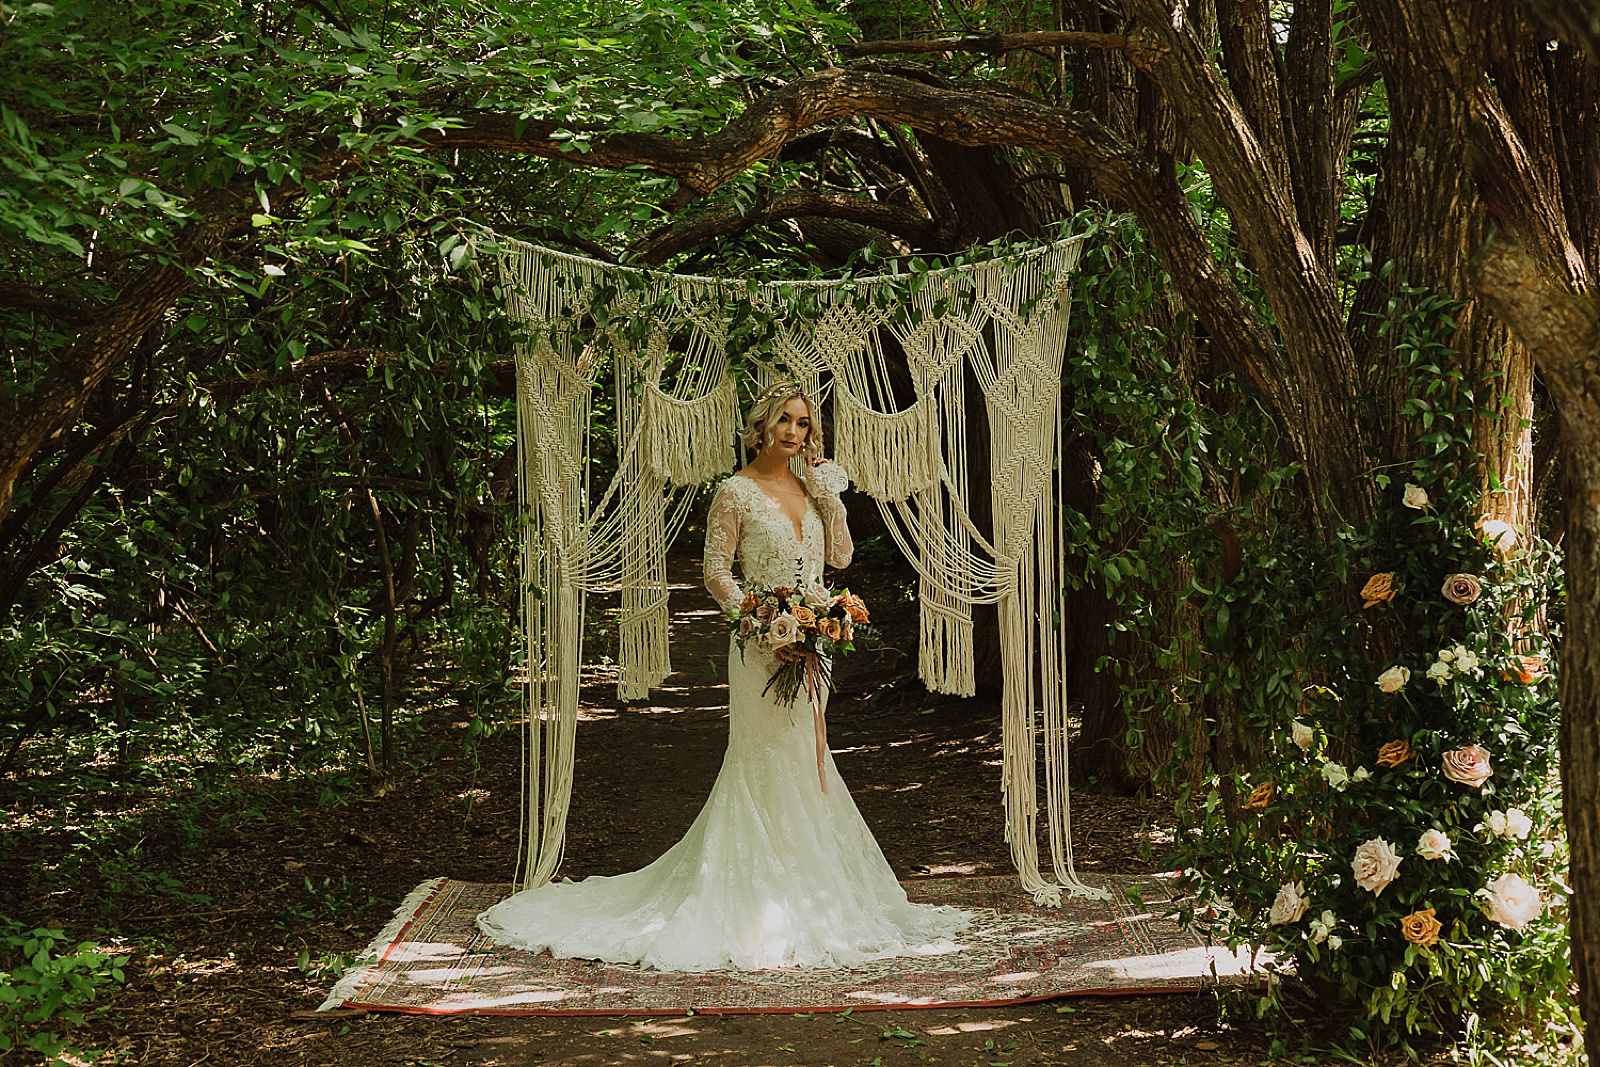 Ceremony Boho Kansas City Styled Elopement captured by Caitlyn Cloud Photography